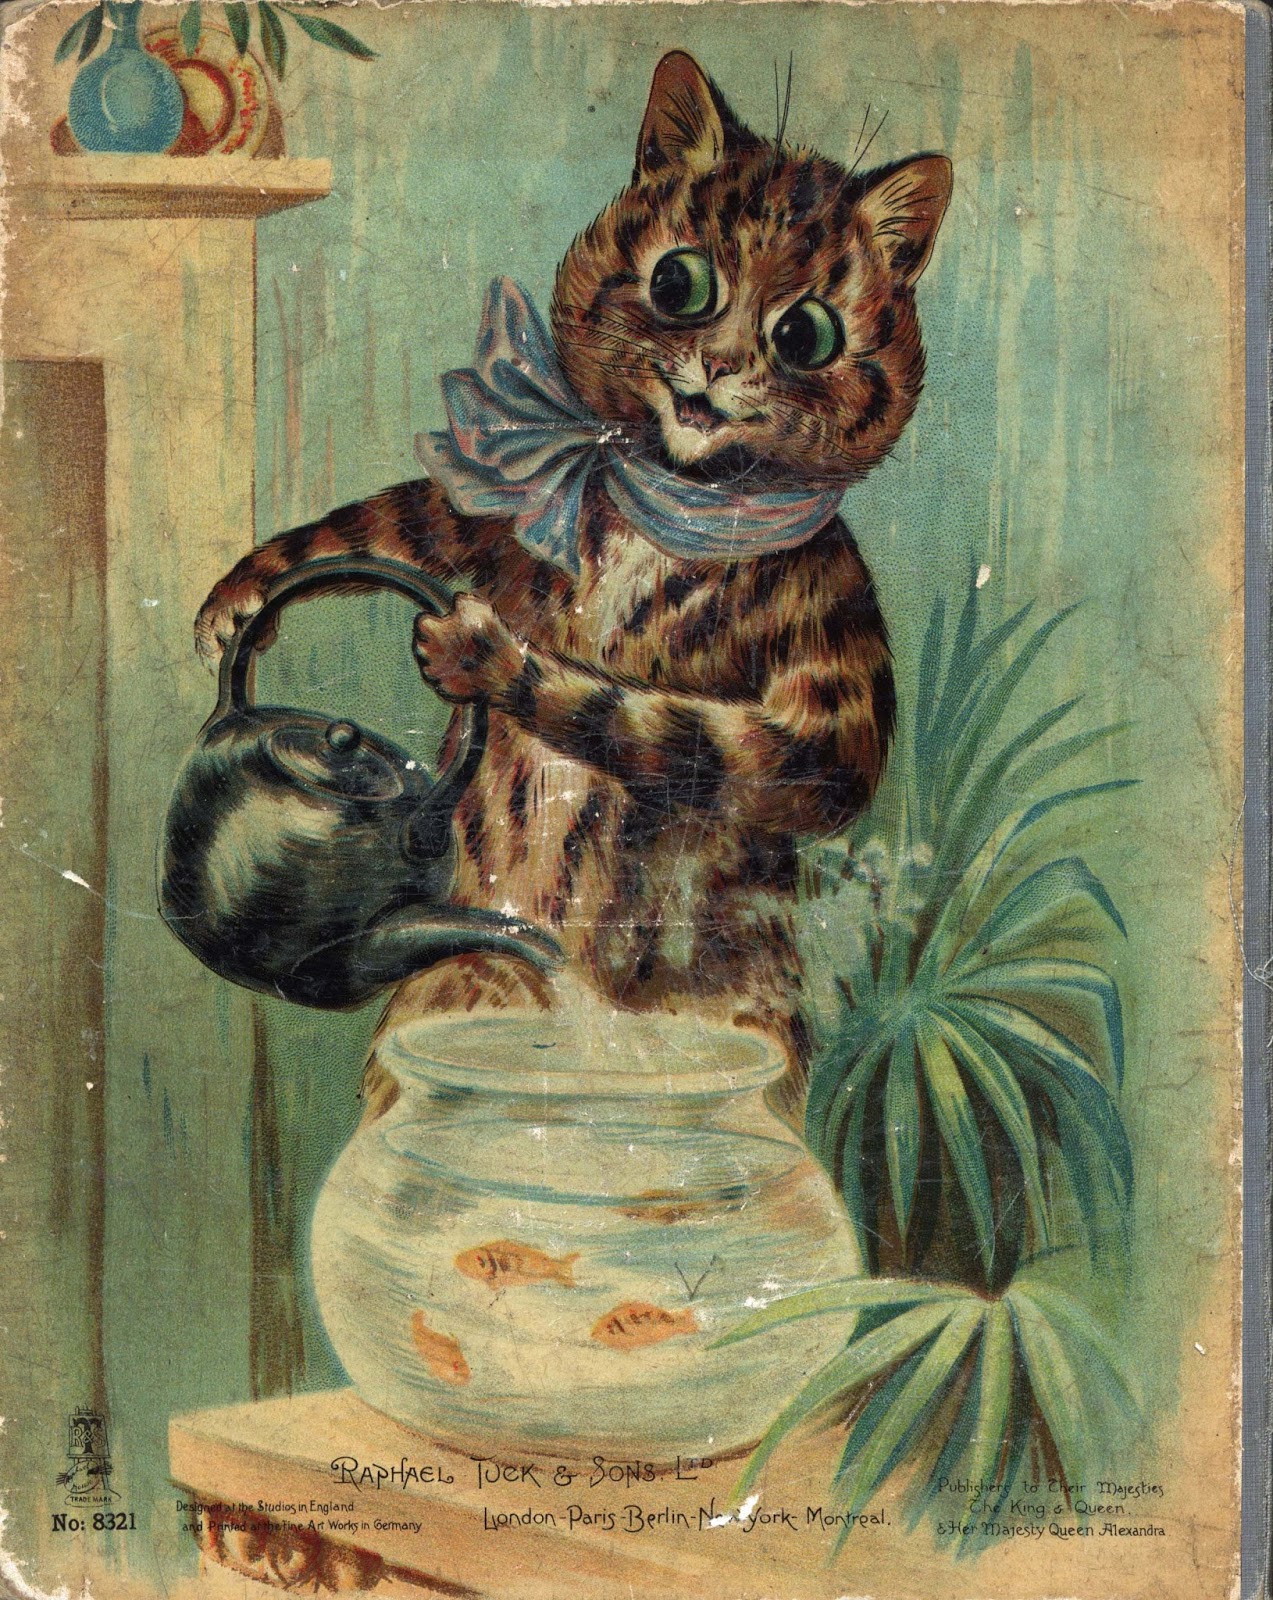 Paw-some' cat drawings by Louis Wain • V&A Blog